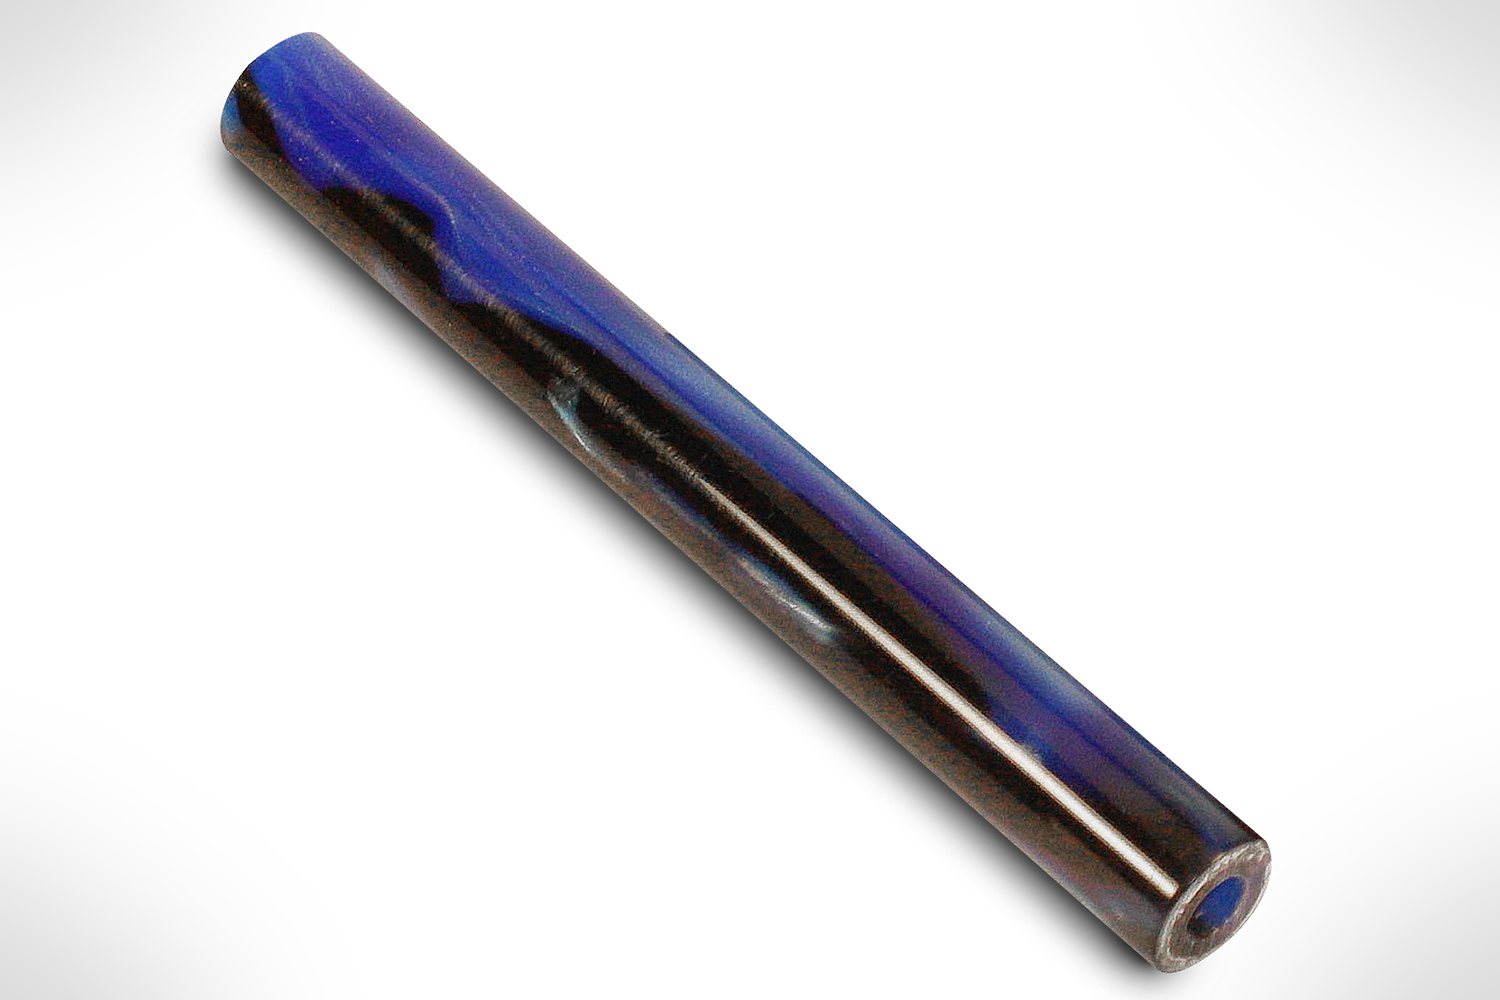 Aquapearl Deep Blue and Black Pre-Drilled 7mm - 5/8 in.dia x 5 in. Pen Blank AQP07 PSI